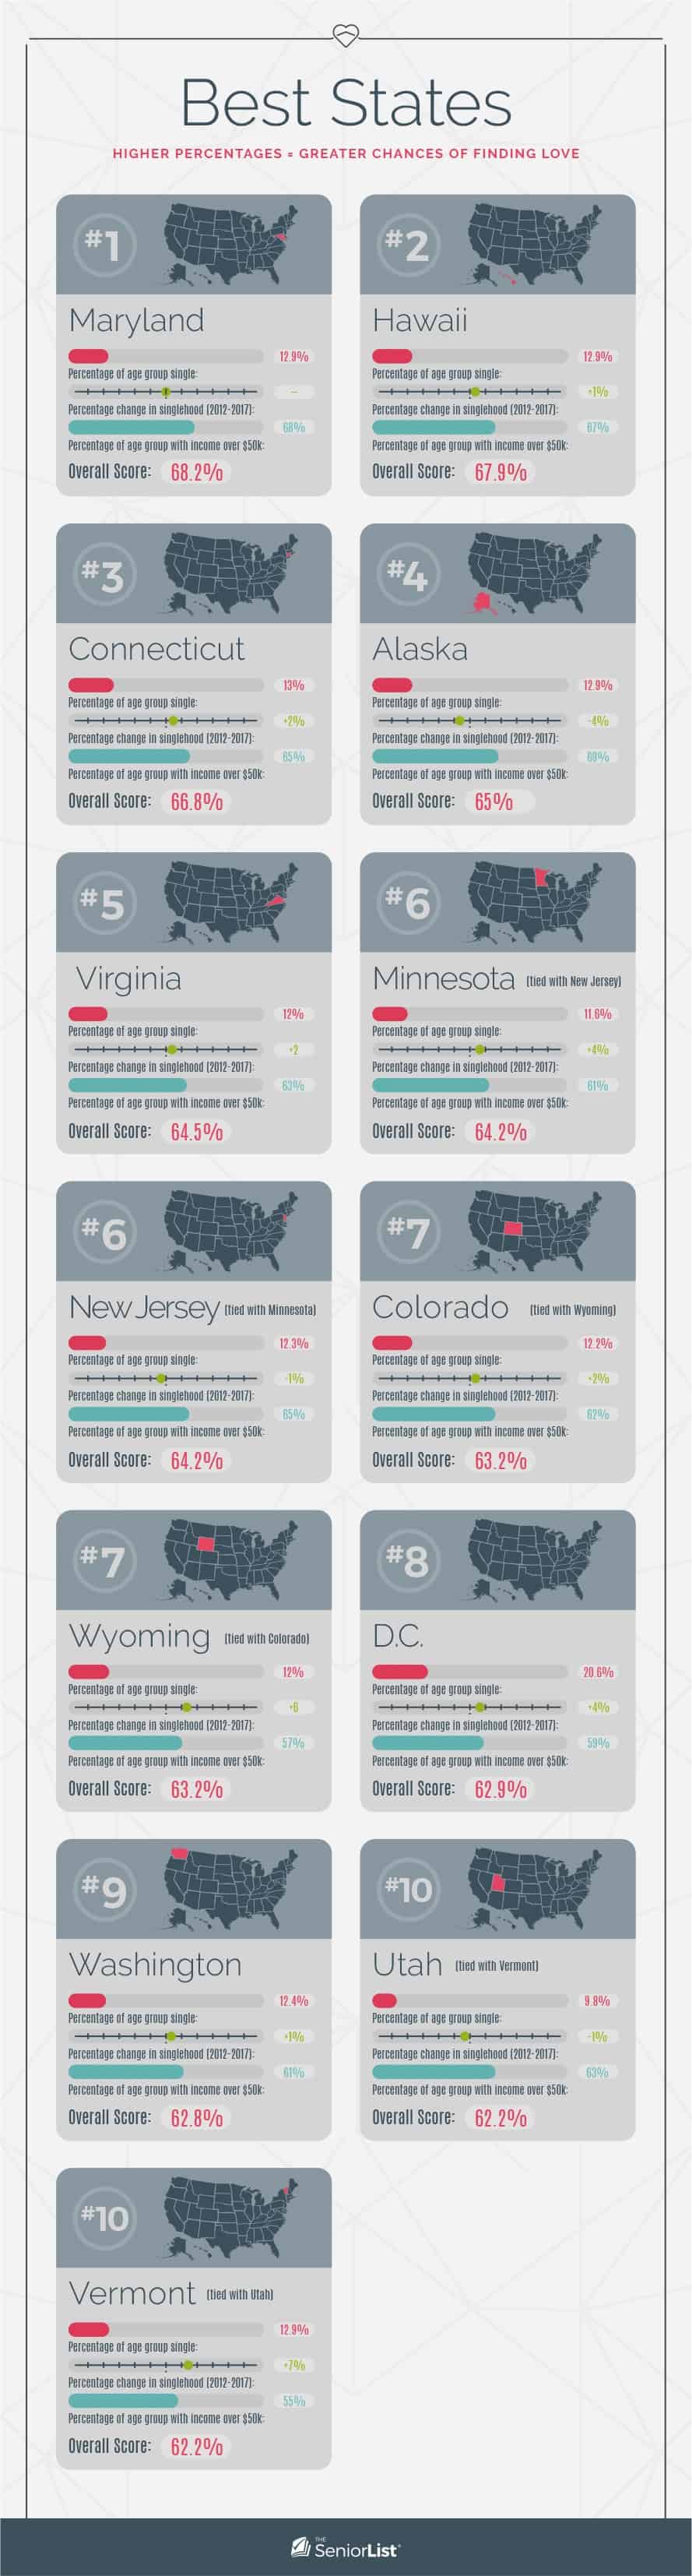 Best States, HIGHER PERCENTAGES GREATER CHANCES OF FINDING LOVE, # 1, # 2, Maryland, Hawaii, 12.9 %, 12.9 %, Percentage of age group single :, Percentage of age group single Percentage change in singlehood ( 2012-2017 ), + 1 %, Percentage change in singlehood 2012-2017 ) :, 68 %, Percentage of age group with income over $ Overall Score : 68.2 %, Percentage of age group with income over $ 50k Overall Score : 67.9 %, # 3, Connecticut, Alaska, 13 %, 12.9, Percentage of age group single, Percentage of age group single :, + 2 %, Percentage change in 2012-2017 ), Percentage change in singlehood ( 2012-2017 ) :, 65 %, 69 %, Percentage of age group with income over $ 50k Overall Score : 66.8 %, Percentage of age group with income over $ Overall Score : 65 %, # 5, # 6, Virginia, 12 %, 11.6 %, Percentage of age group single :, +2, Percentage of age group single :, + 4, Percentage change in singlehood ( 2012-2017 ), 63 %, 61 %, Percentage of age group with income over $, Percentage of age group with income over $ 50k Overall Score : 64.2 %, Overall Score : 64.5 %, # 6, New Jersey with, Colorado with Wyoming, 12.3, 12.2, Percentage of age group single, Percentage of age group single, -1 %, Percentage change in singlehood ( 2012-2017 ), Percentage change in singlehood ( 2012-2017 ) :, 65 %, 62 %, Percentage of age group with income over $ Overall Score : 64.2 %, Percentage of age group with income over $ Overall Score : 63.2 %, # 7, # 8, Wyoming, with Colorado, D.C. 20.6 %, Percentage of age group single, Percentage of age group single :, + 4 %, Percentage change in singlehood ( 2012-2017 ), 57 %, 59 %, Percentage of age group with income over $ Overall Score : 63.2 %, Percentage of age group with income over $ Overall Score : 62.9, #, Washington, Utah tied with Vermont, 12.4 %, 9.8 %, Percentage of age group single, + 1, Percentage of age group single Percentage change in singlehood ( 2012-2017 ) :, -1 %, Percentage change in singlehood ( 2012-2017 ), 61 %, 63 %, Percentage of age group with income over $ Overall Score : 62.8, Percentage of age group with income over $ 50k Overall Score : 62.2 %, # 10, Vermont ( tied with, 12.9 %, Percentage of age group single, Percentage change in singlehood ( 2012-2017 ), 55 %, Percentage of age group with income over $ Overall Score : 62.2 %, SeniorList